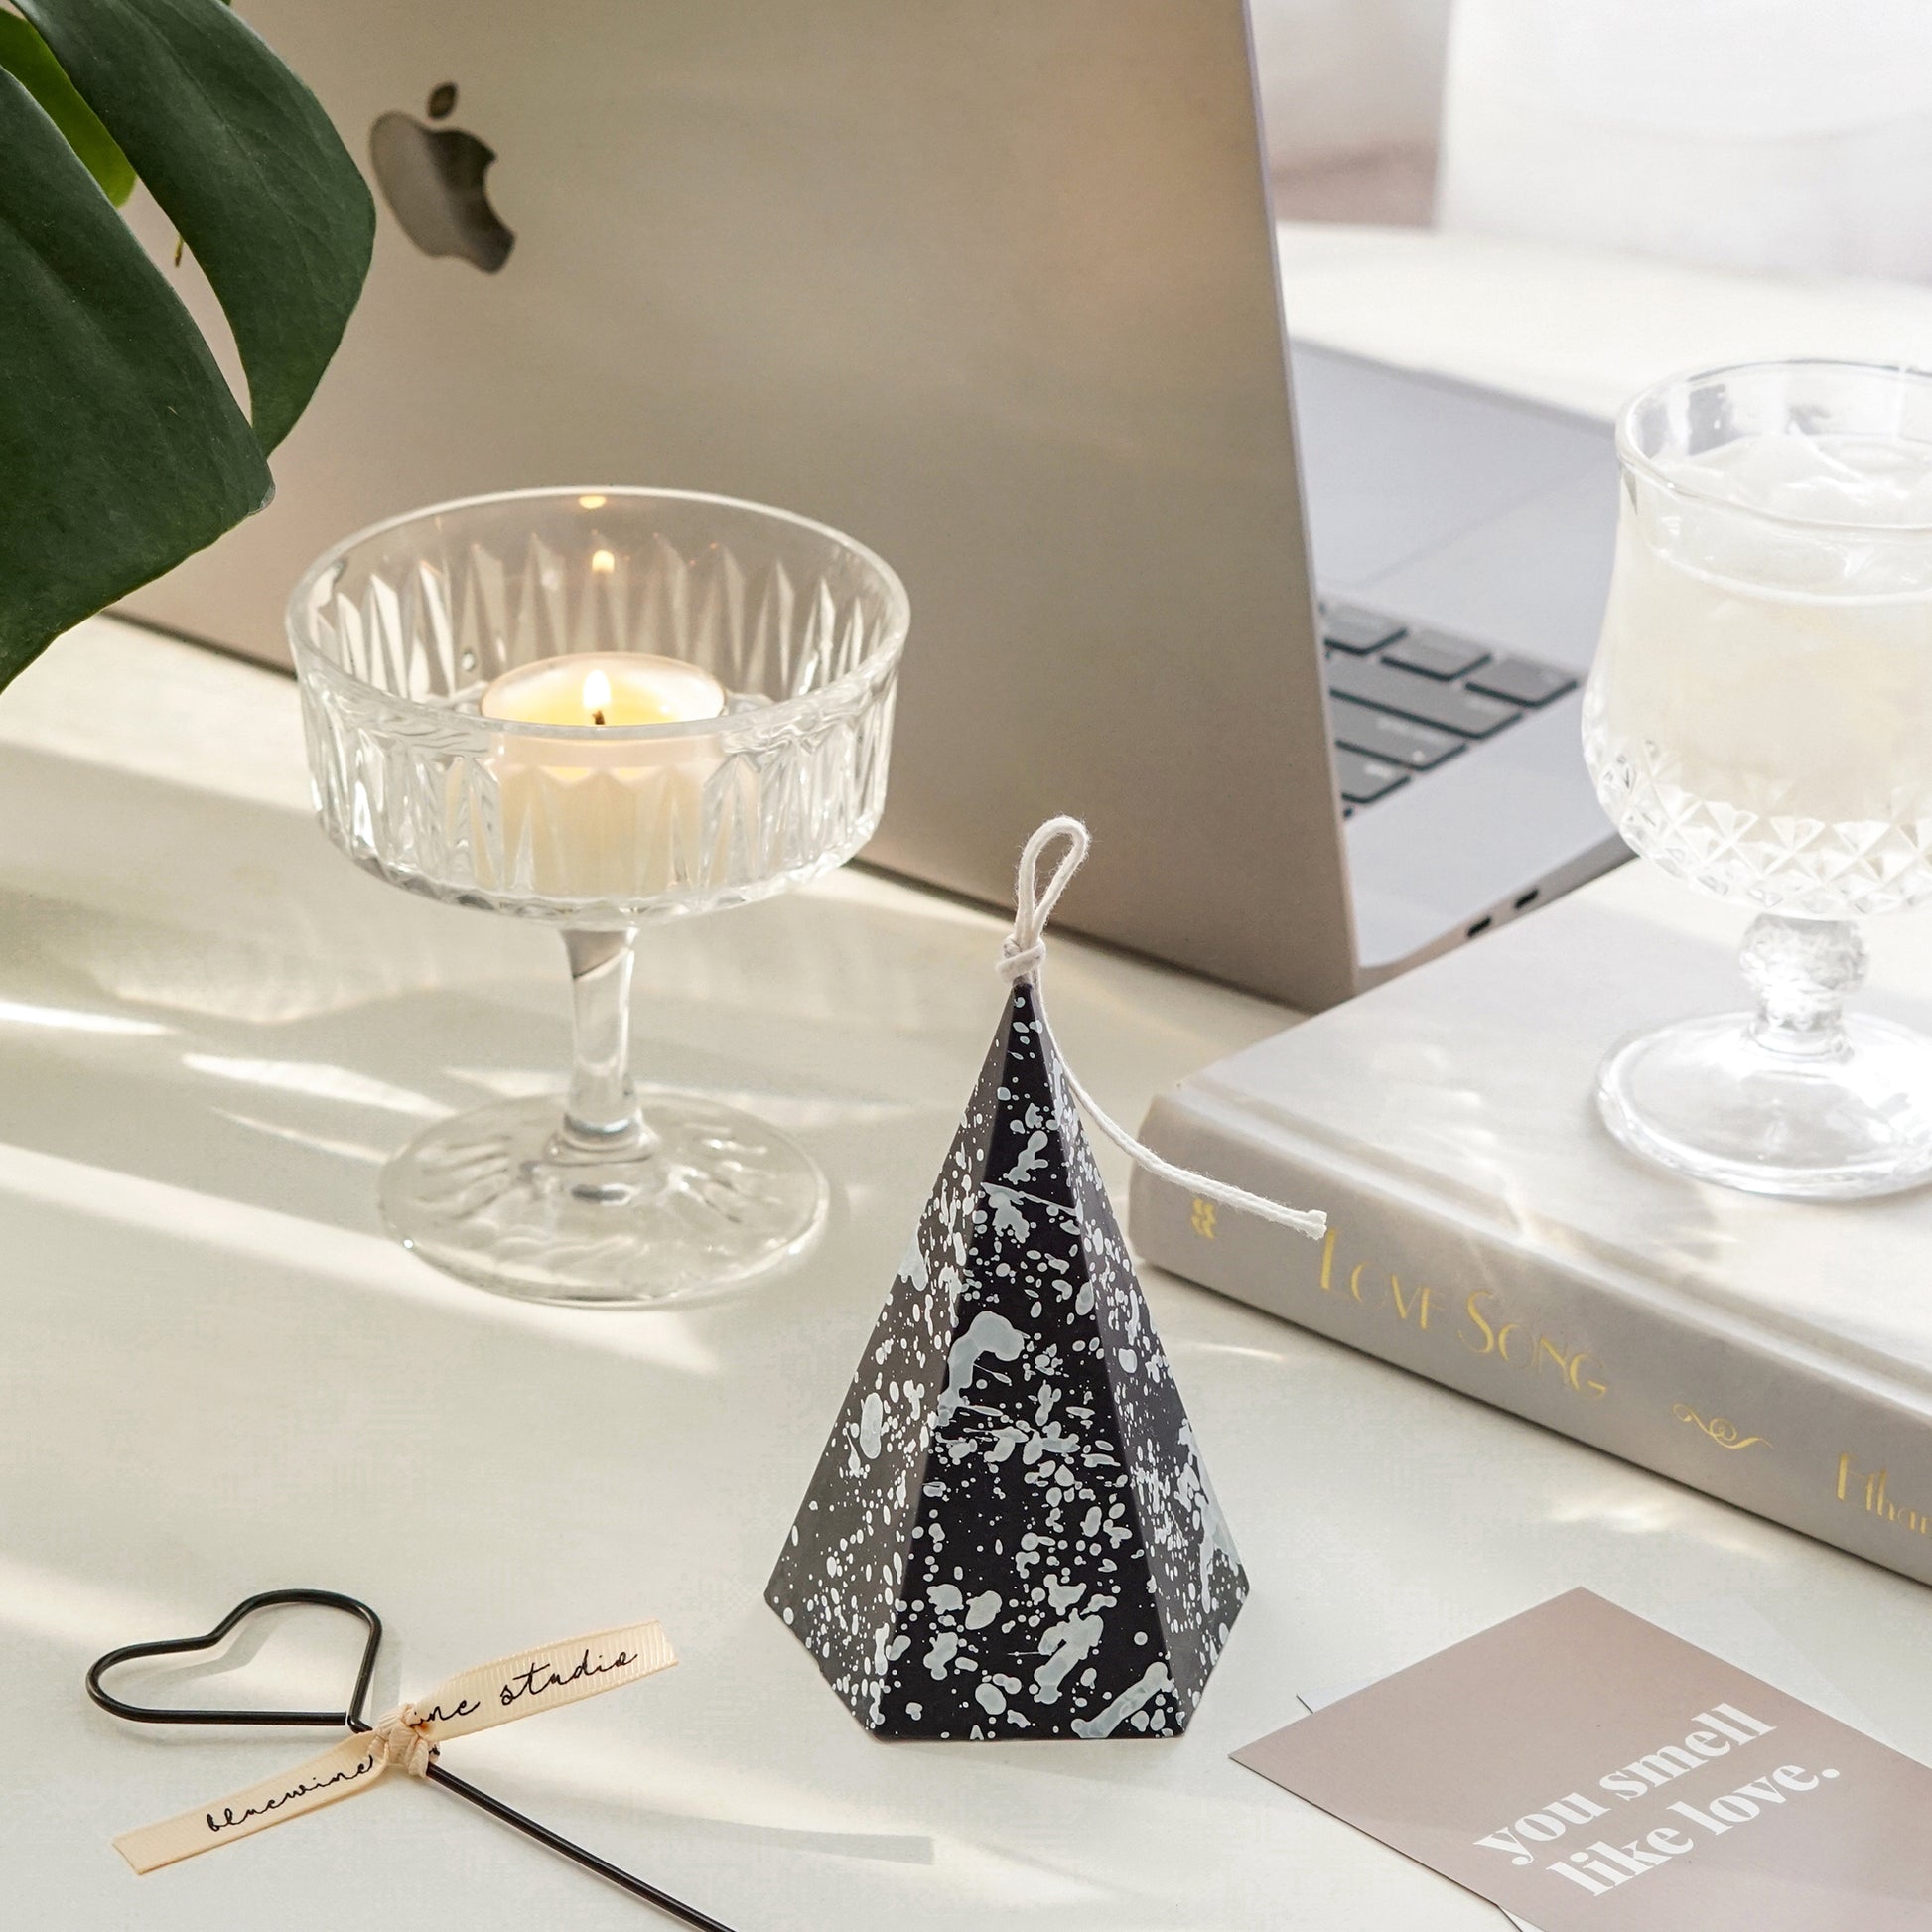 black pentagonal pyramid shape soy pillar candle with white splatter pattern, black heart shape wick dipper, you smell like love beige postcard, a lit tealight candle in a coupe glass, space gray macbook pro, a monstera leaf, mini wine glass filled with ume, and a book called love song